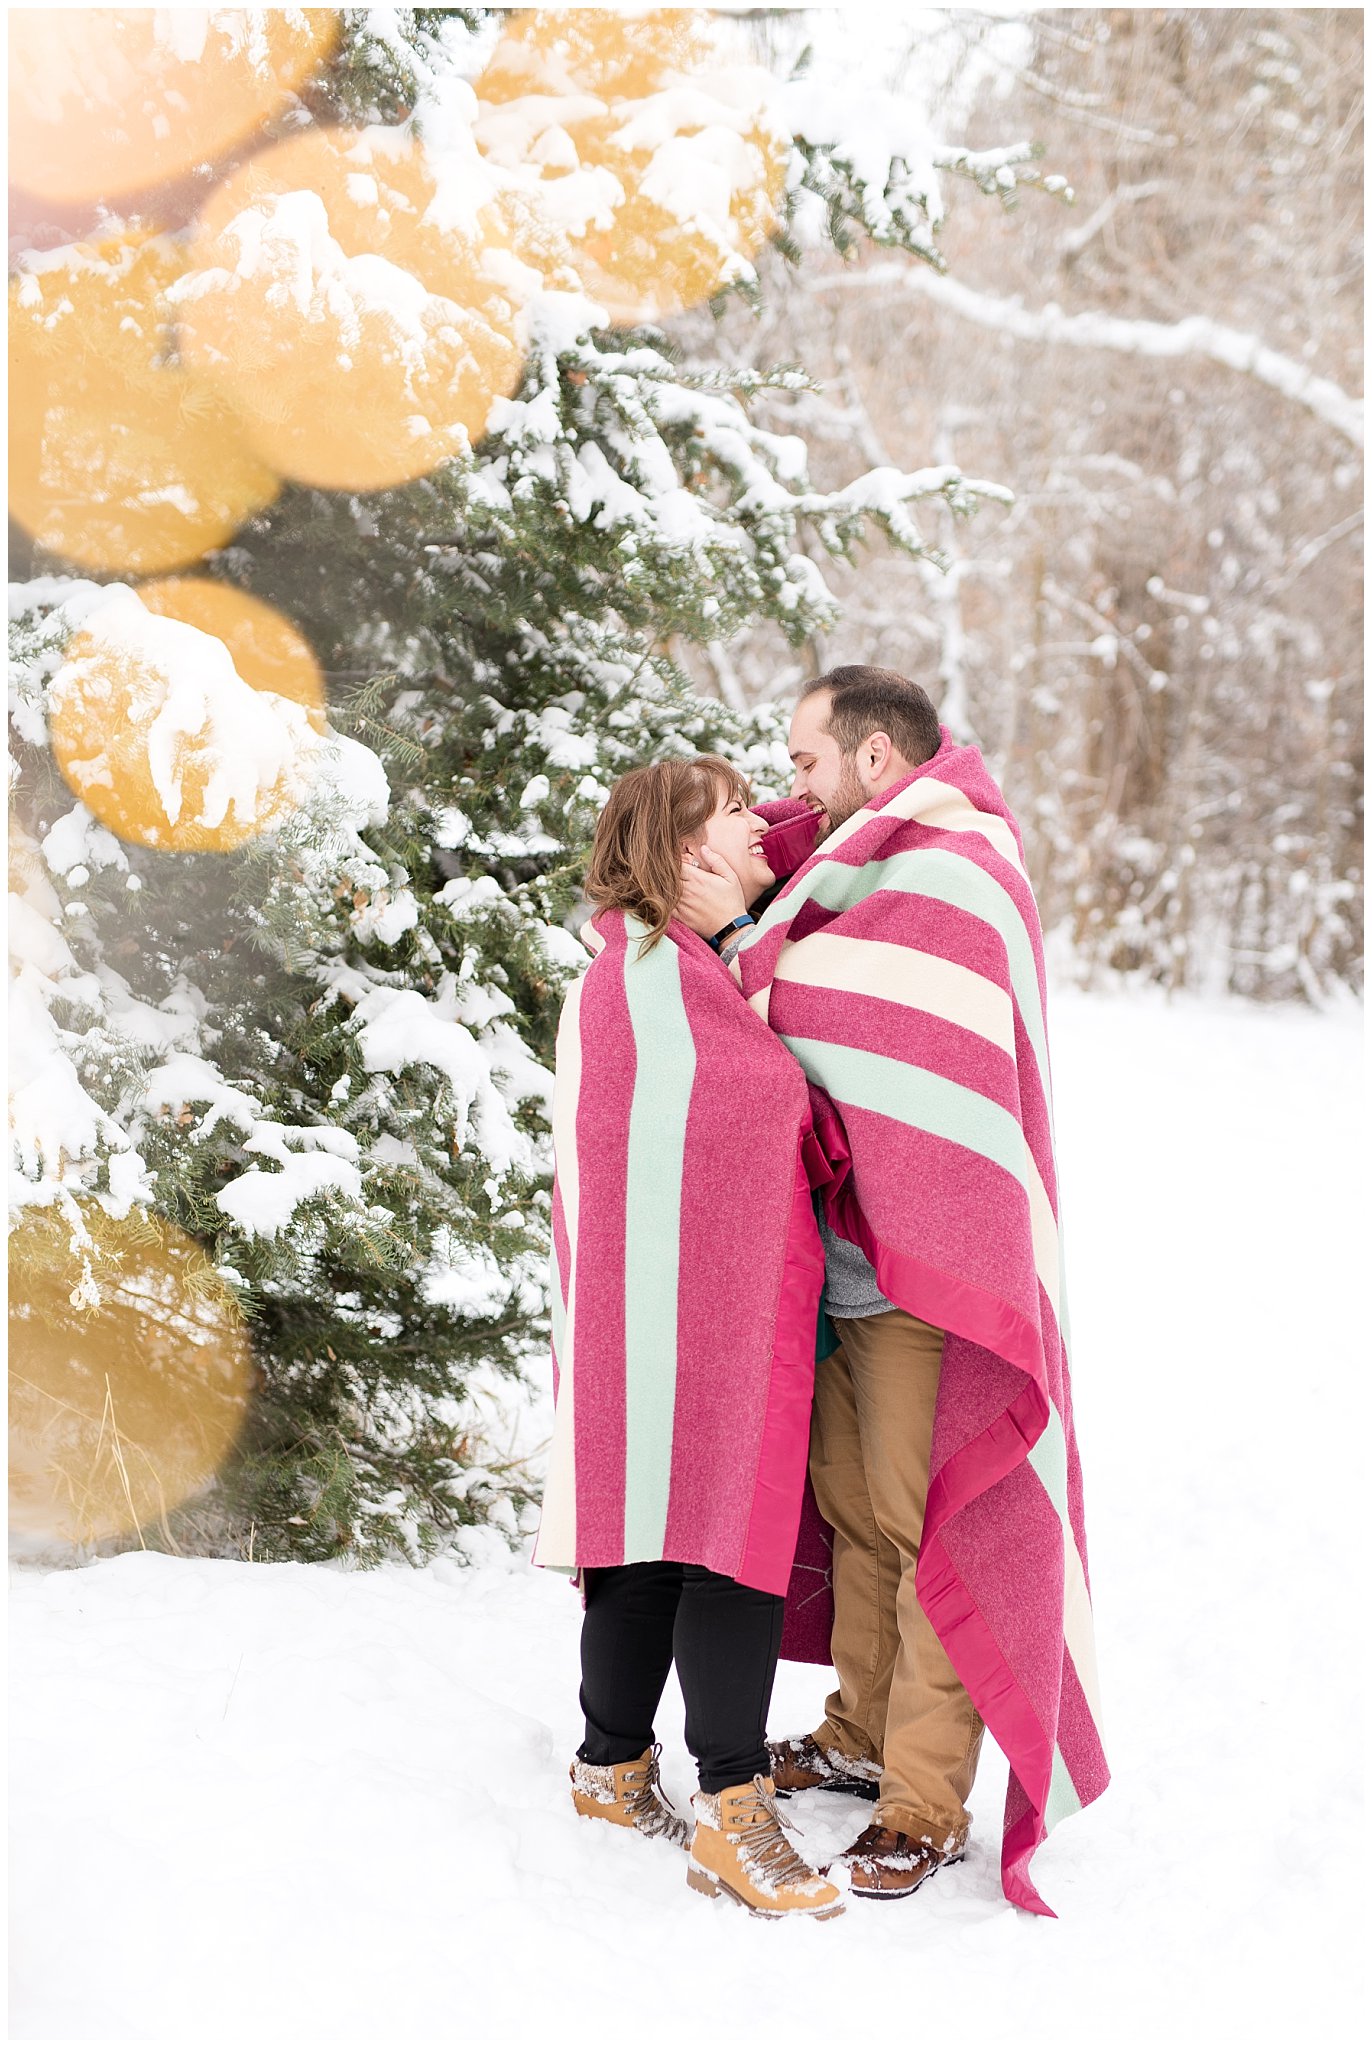 Couple wrapped in warm blanket in the snowy forest | Winter Engagement at Mueller Park and the Utah State Capitol | Jessie and Dallin Photography